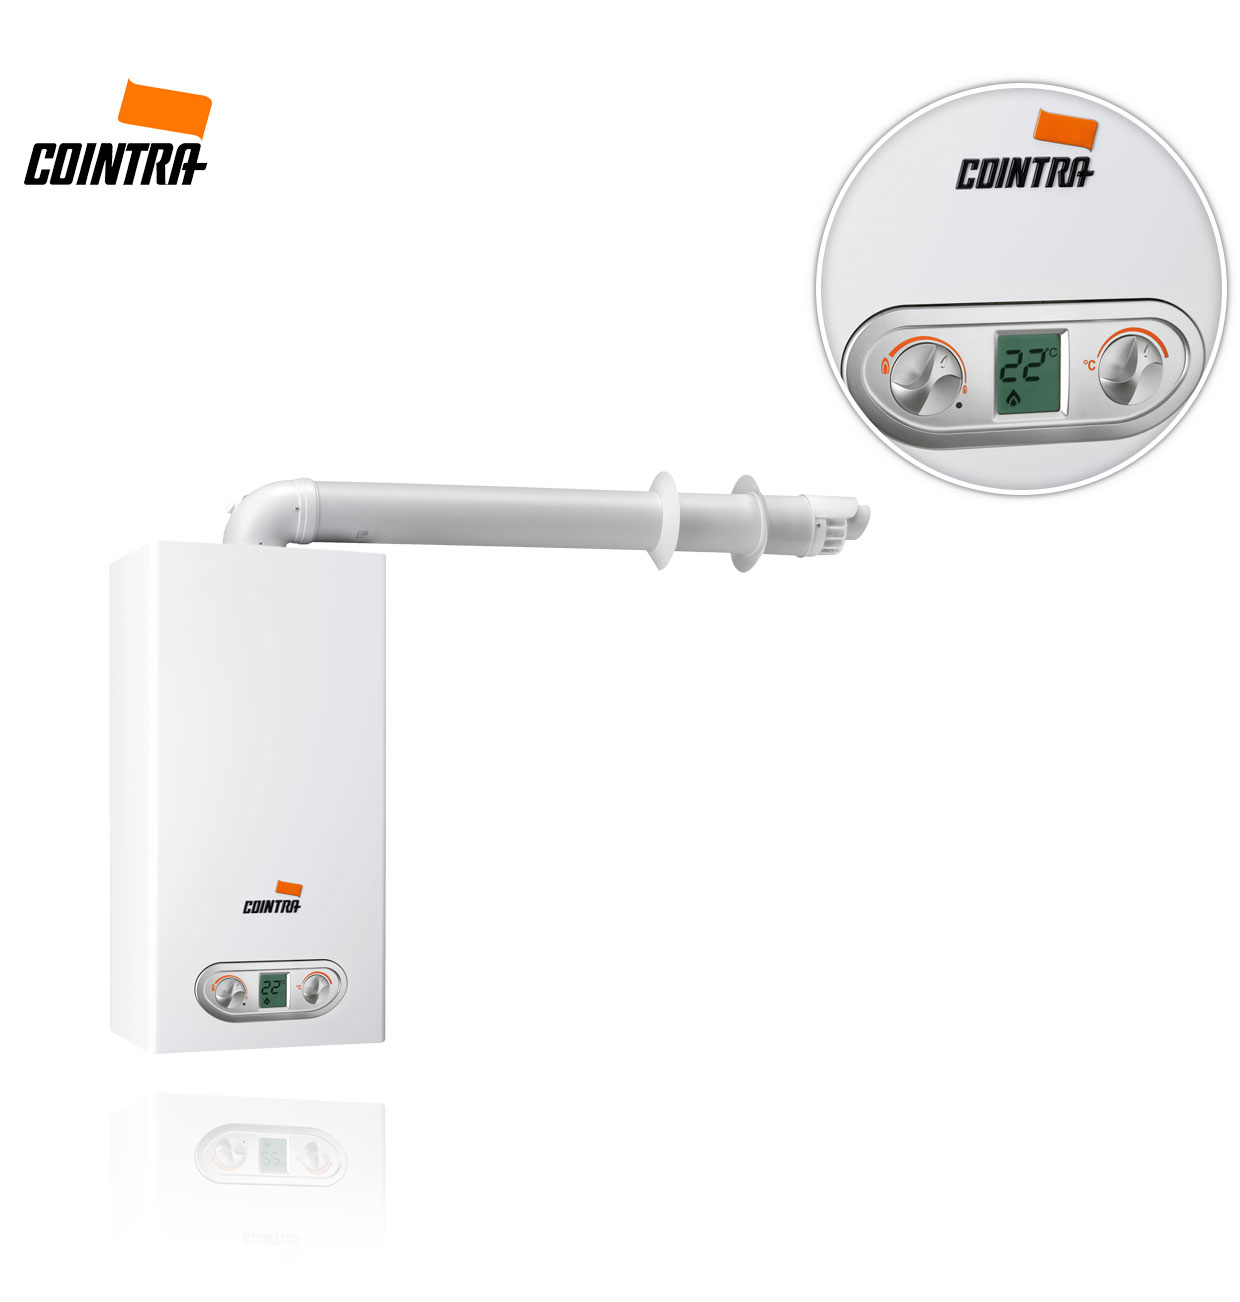 COINTRA SUPREME-11 E PLUS B (B/P GAS) + STANDARD SEALED HEATER GAS OUTLET KIT